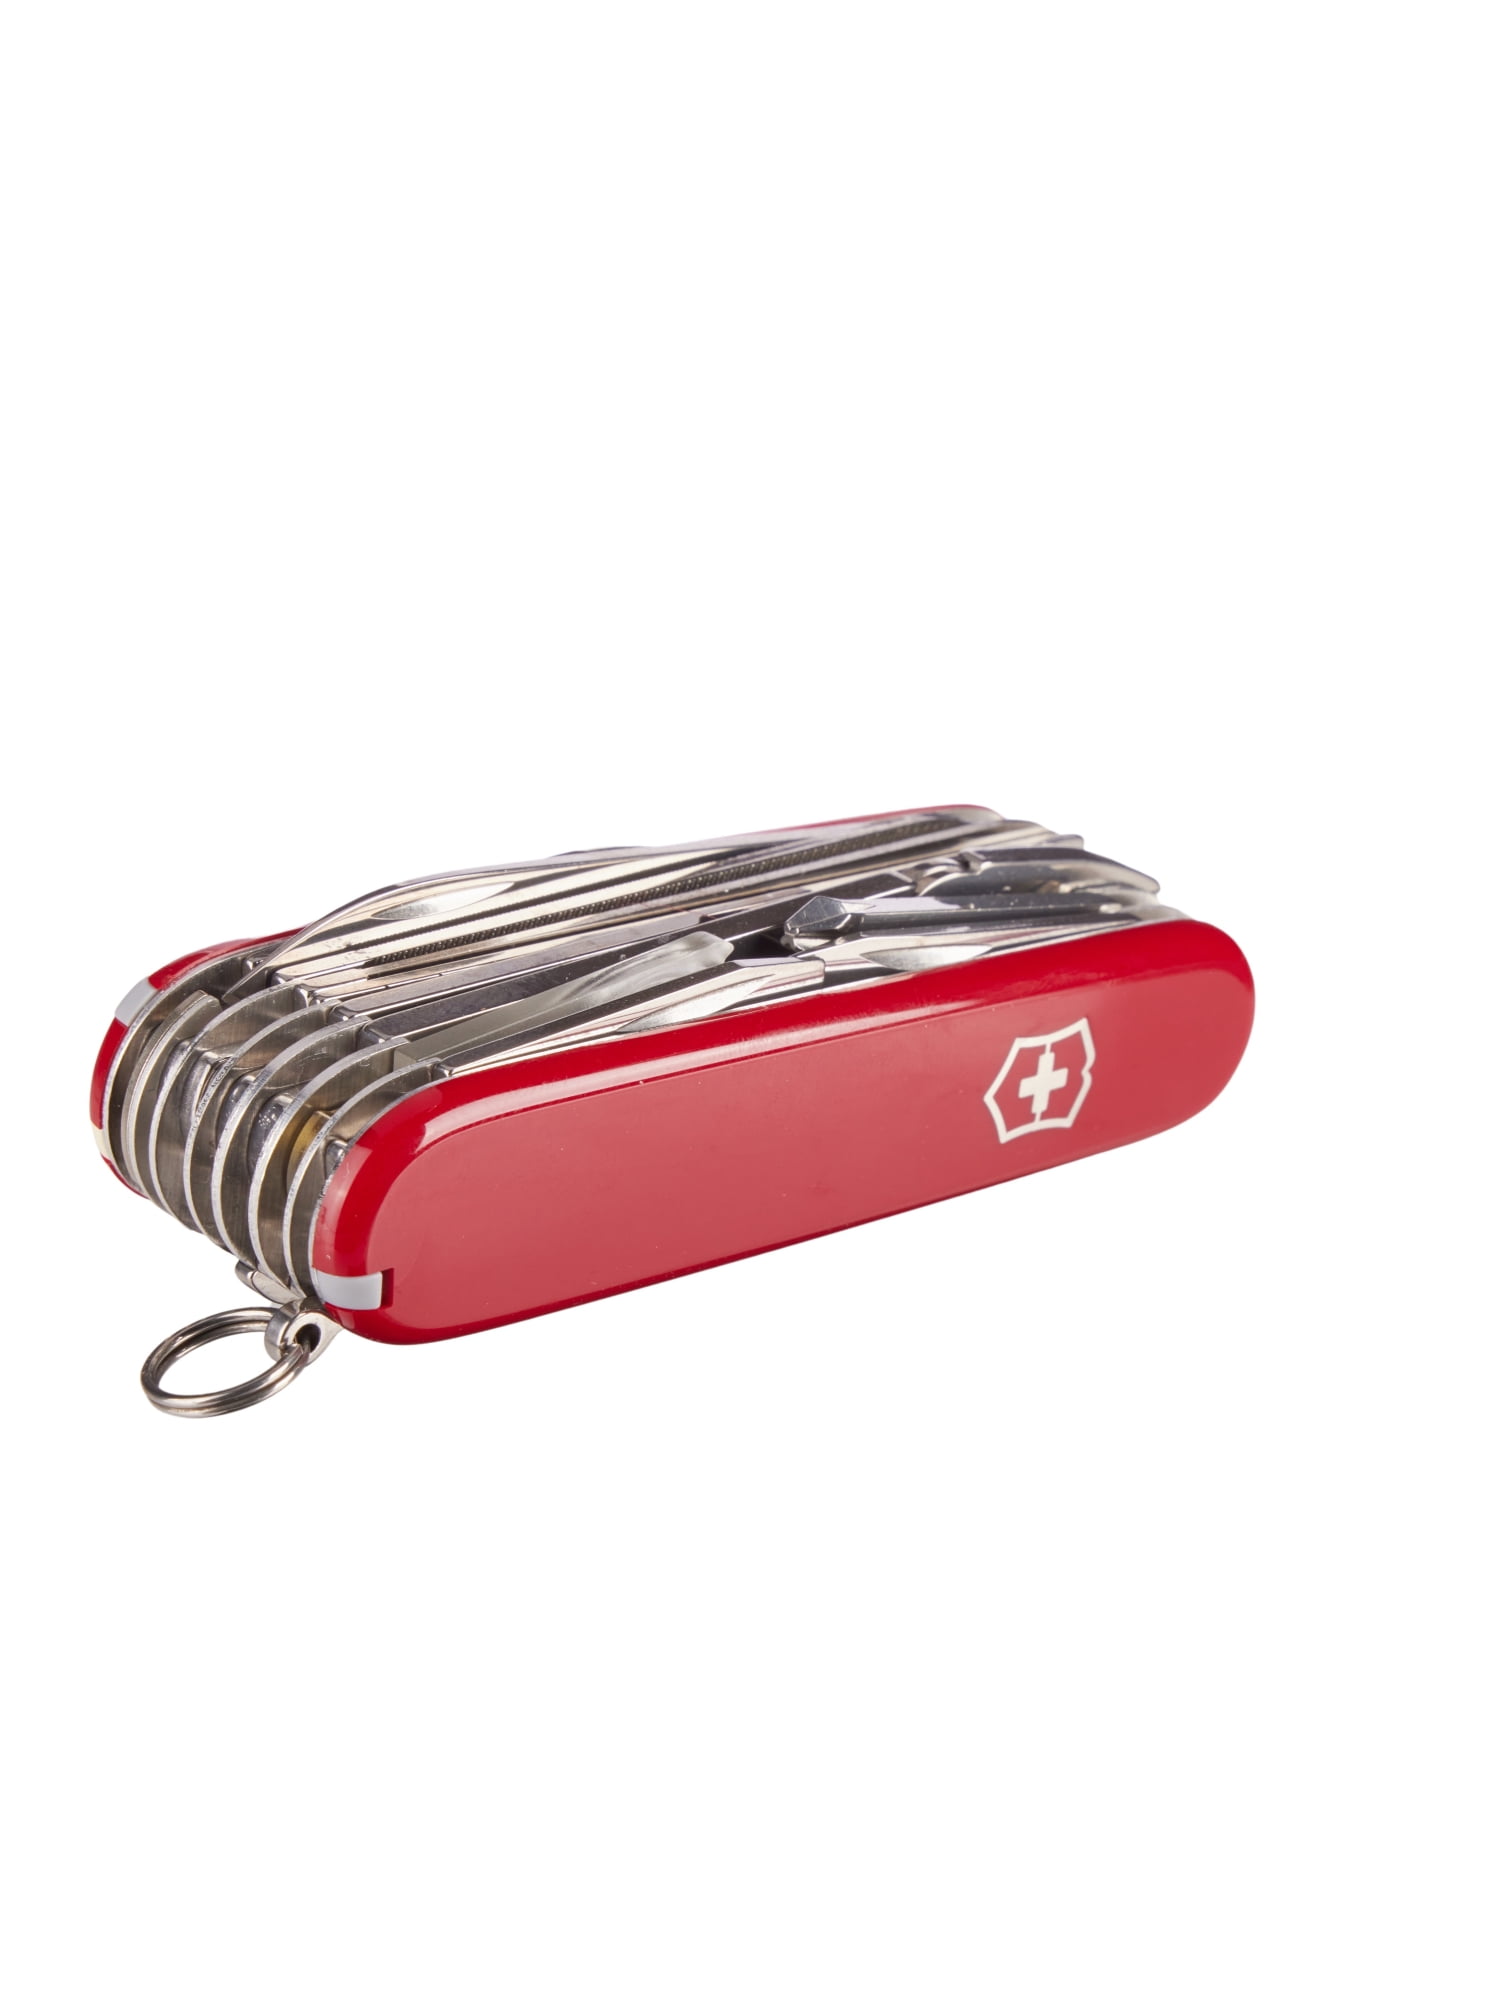 How to Clean and Maintain a Swiss Army Knife – Swiss Knife Shop